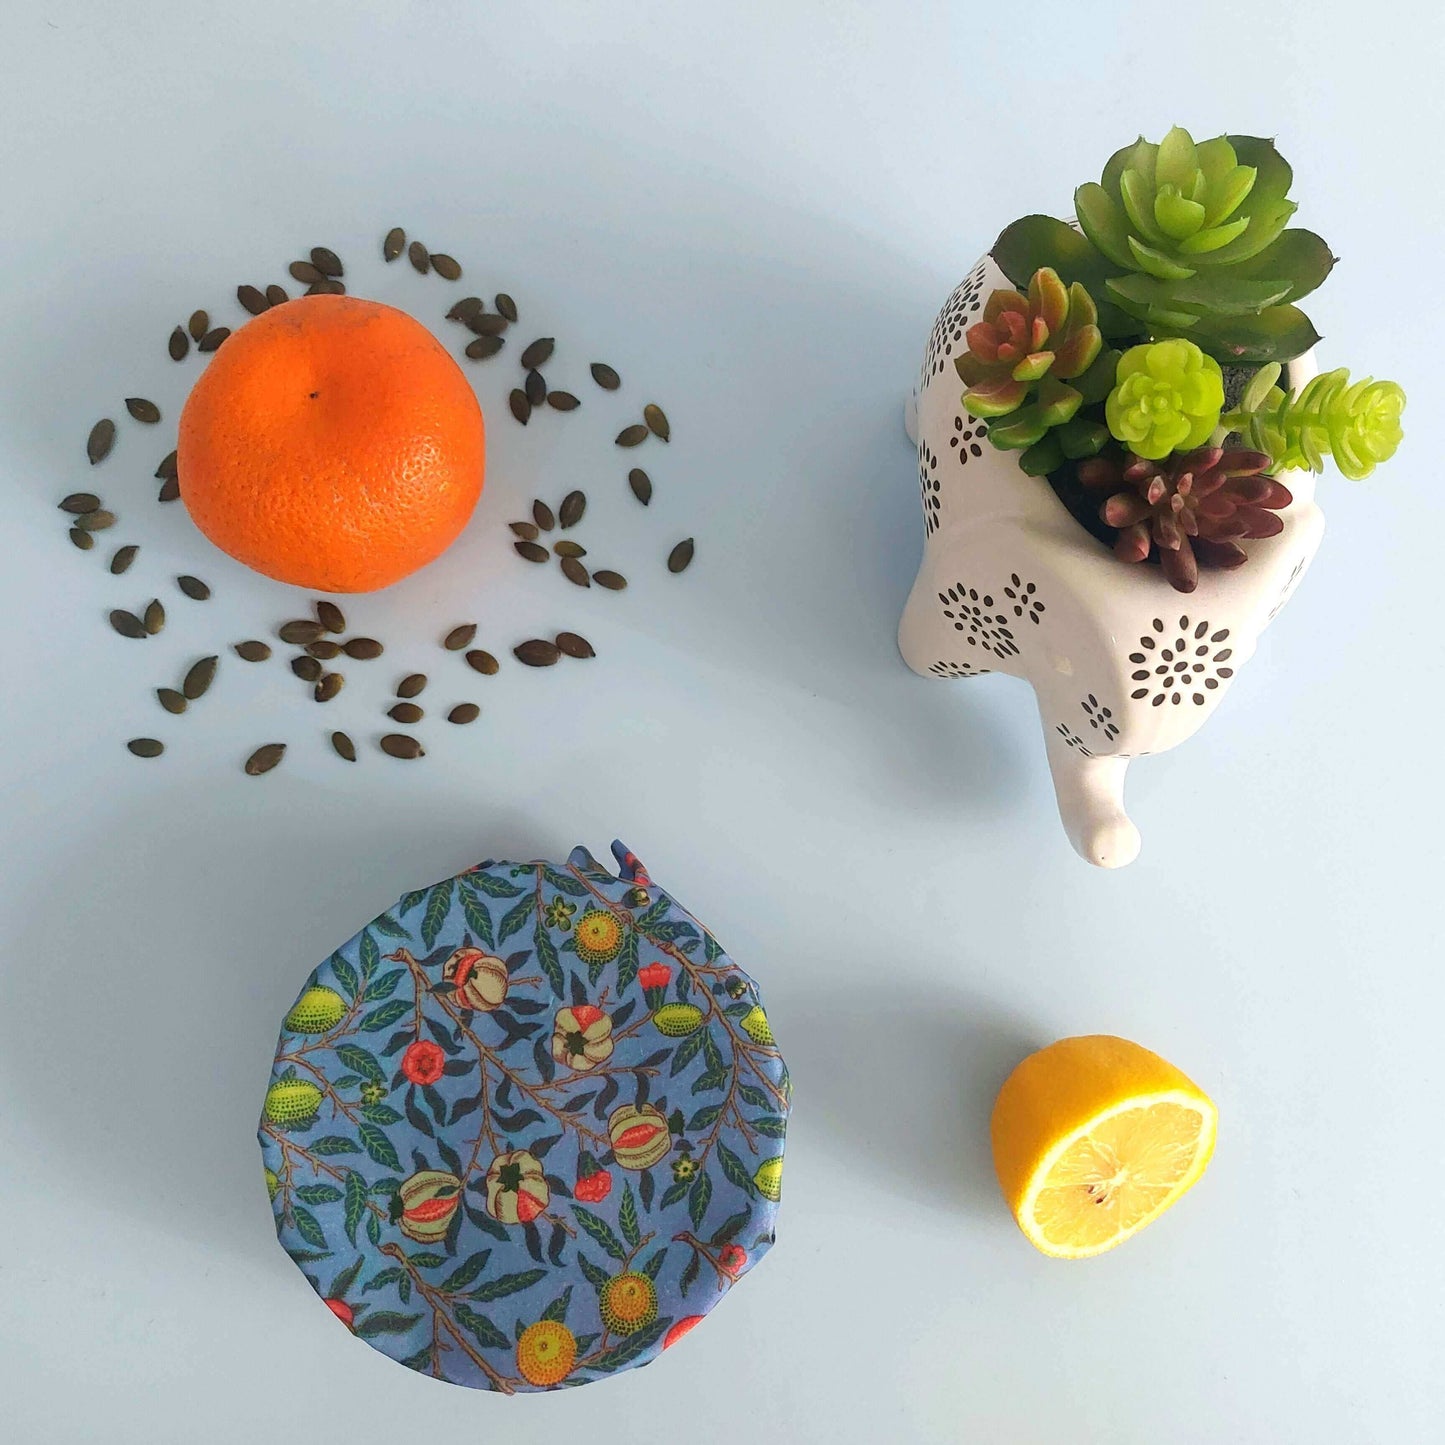 Reusable Beeswax Food Wraps 100% Hand Made in the UK by Honey Bee Good shown in William Morris Pomegranate flatlay